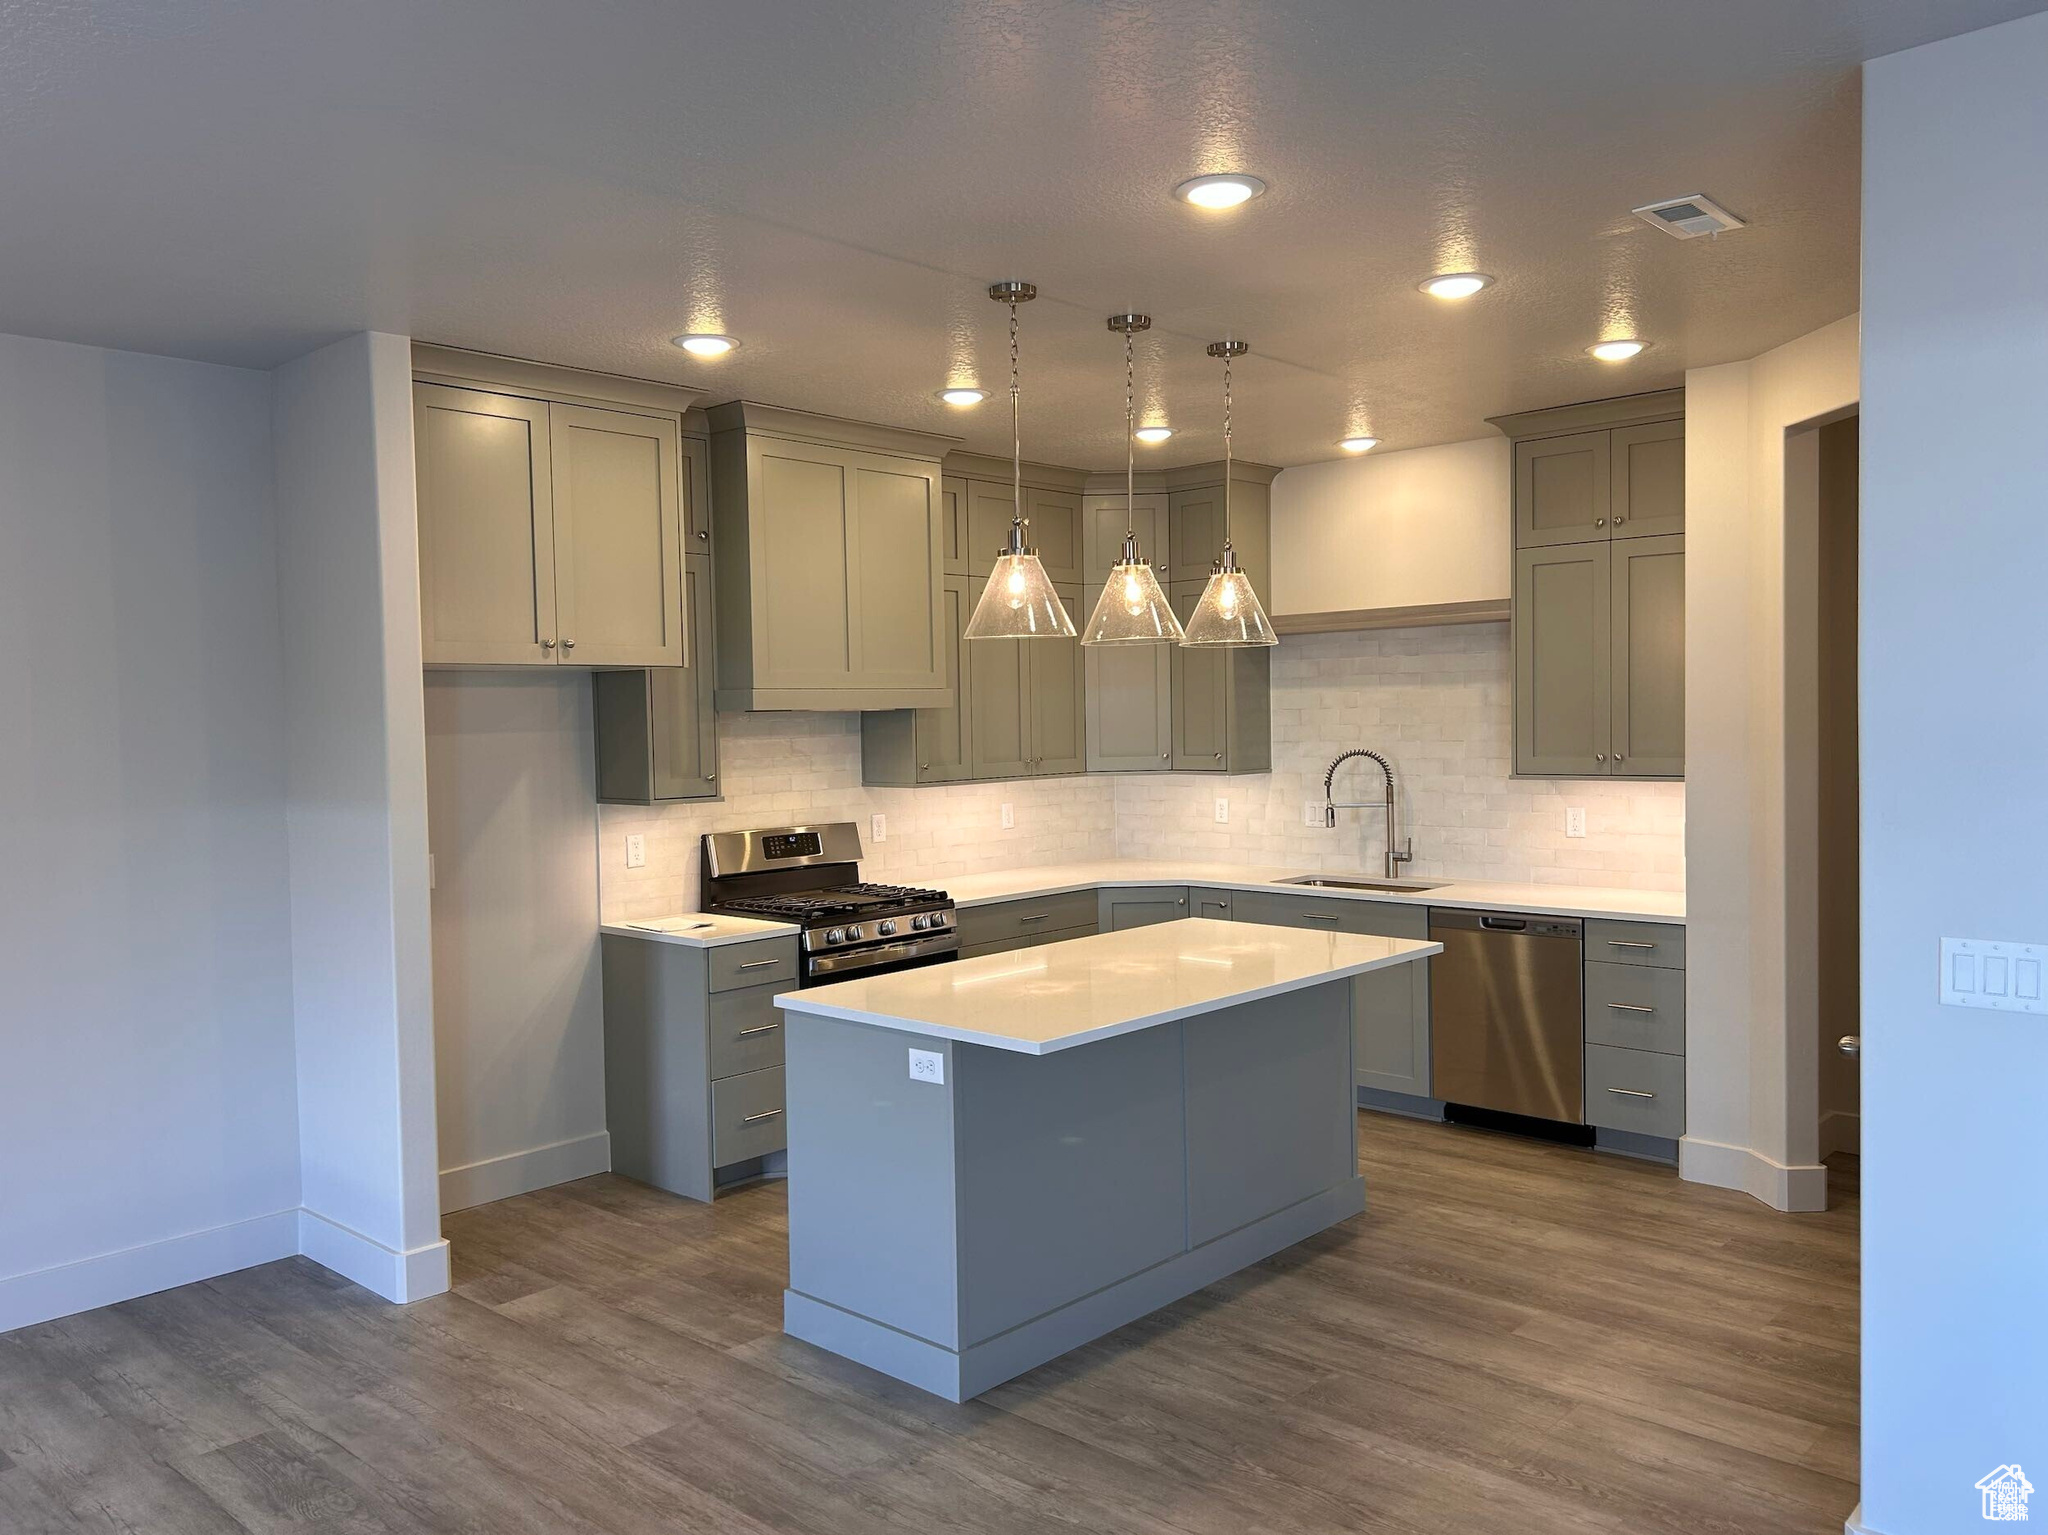 Kitchen featuring a kitchen island, stainless steel appliances, decorative light fixtures, wood-type flooring, and sink